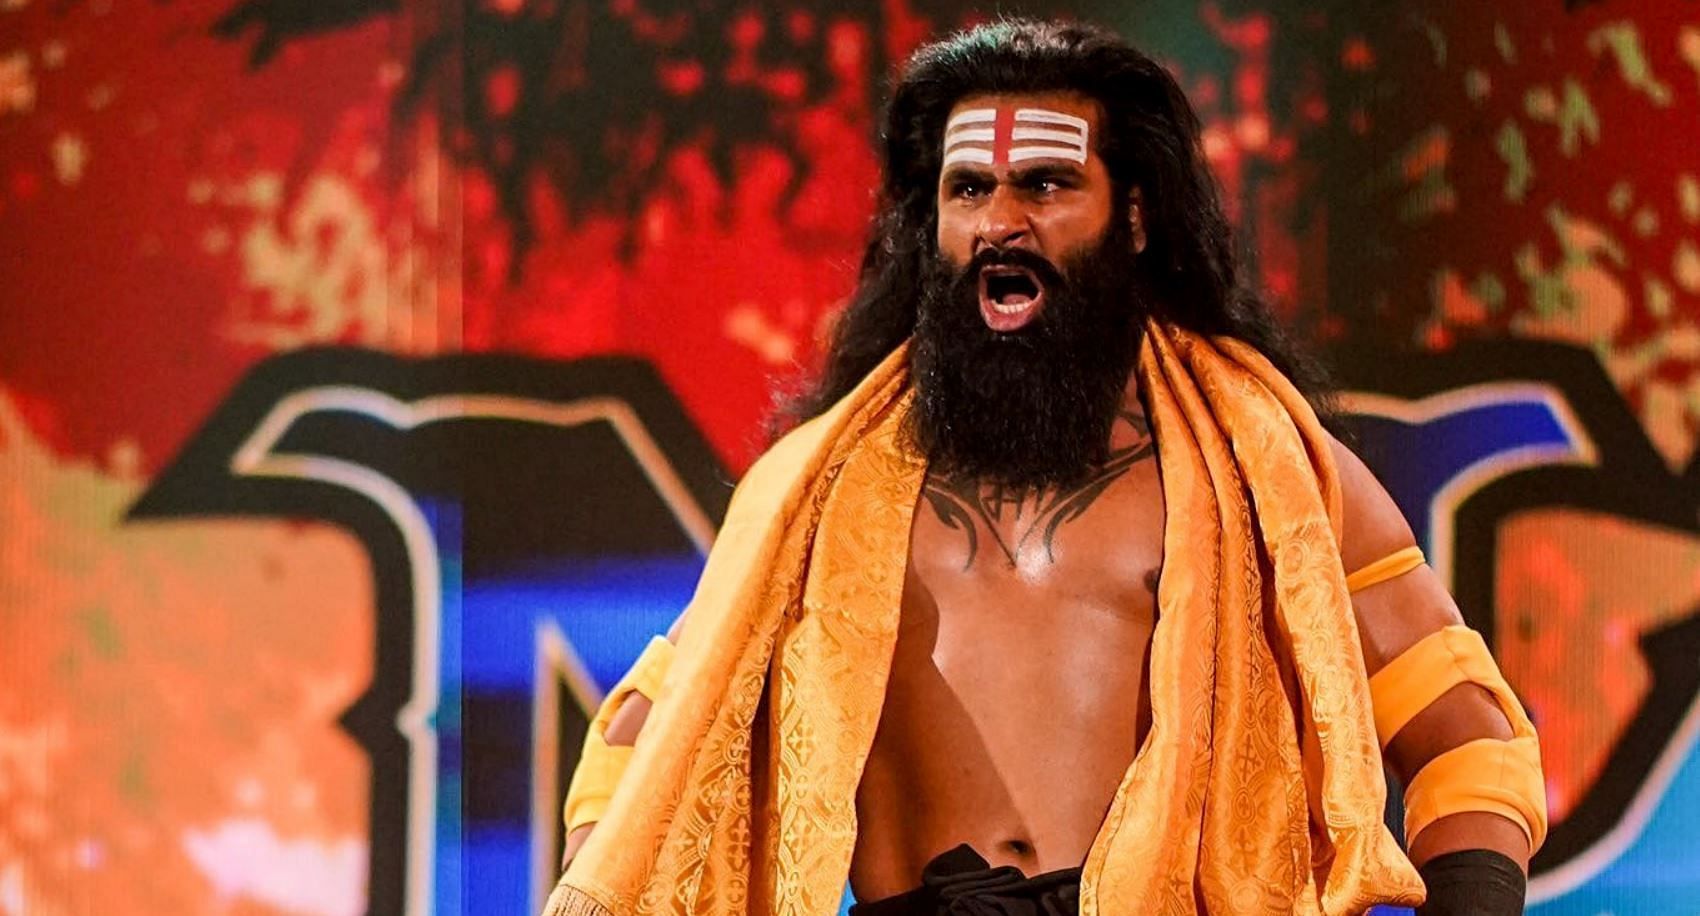 Veer Mahaan sent a heartfelt message to a WWE Hall of Famer on his birthday